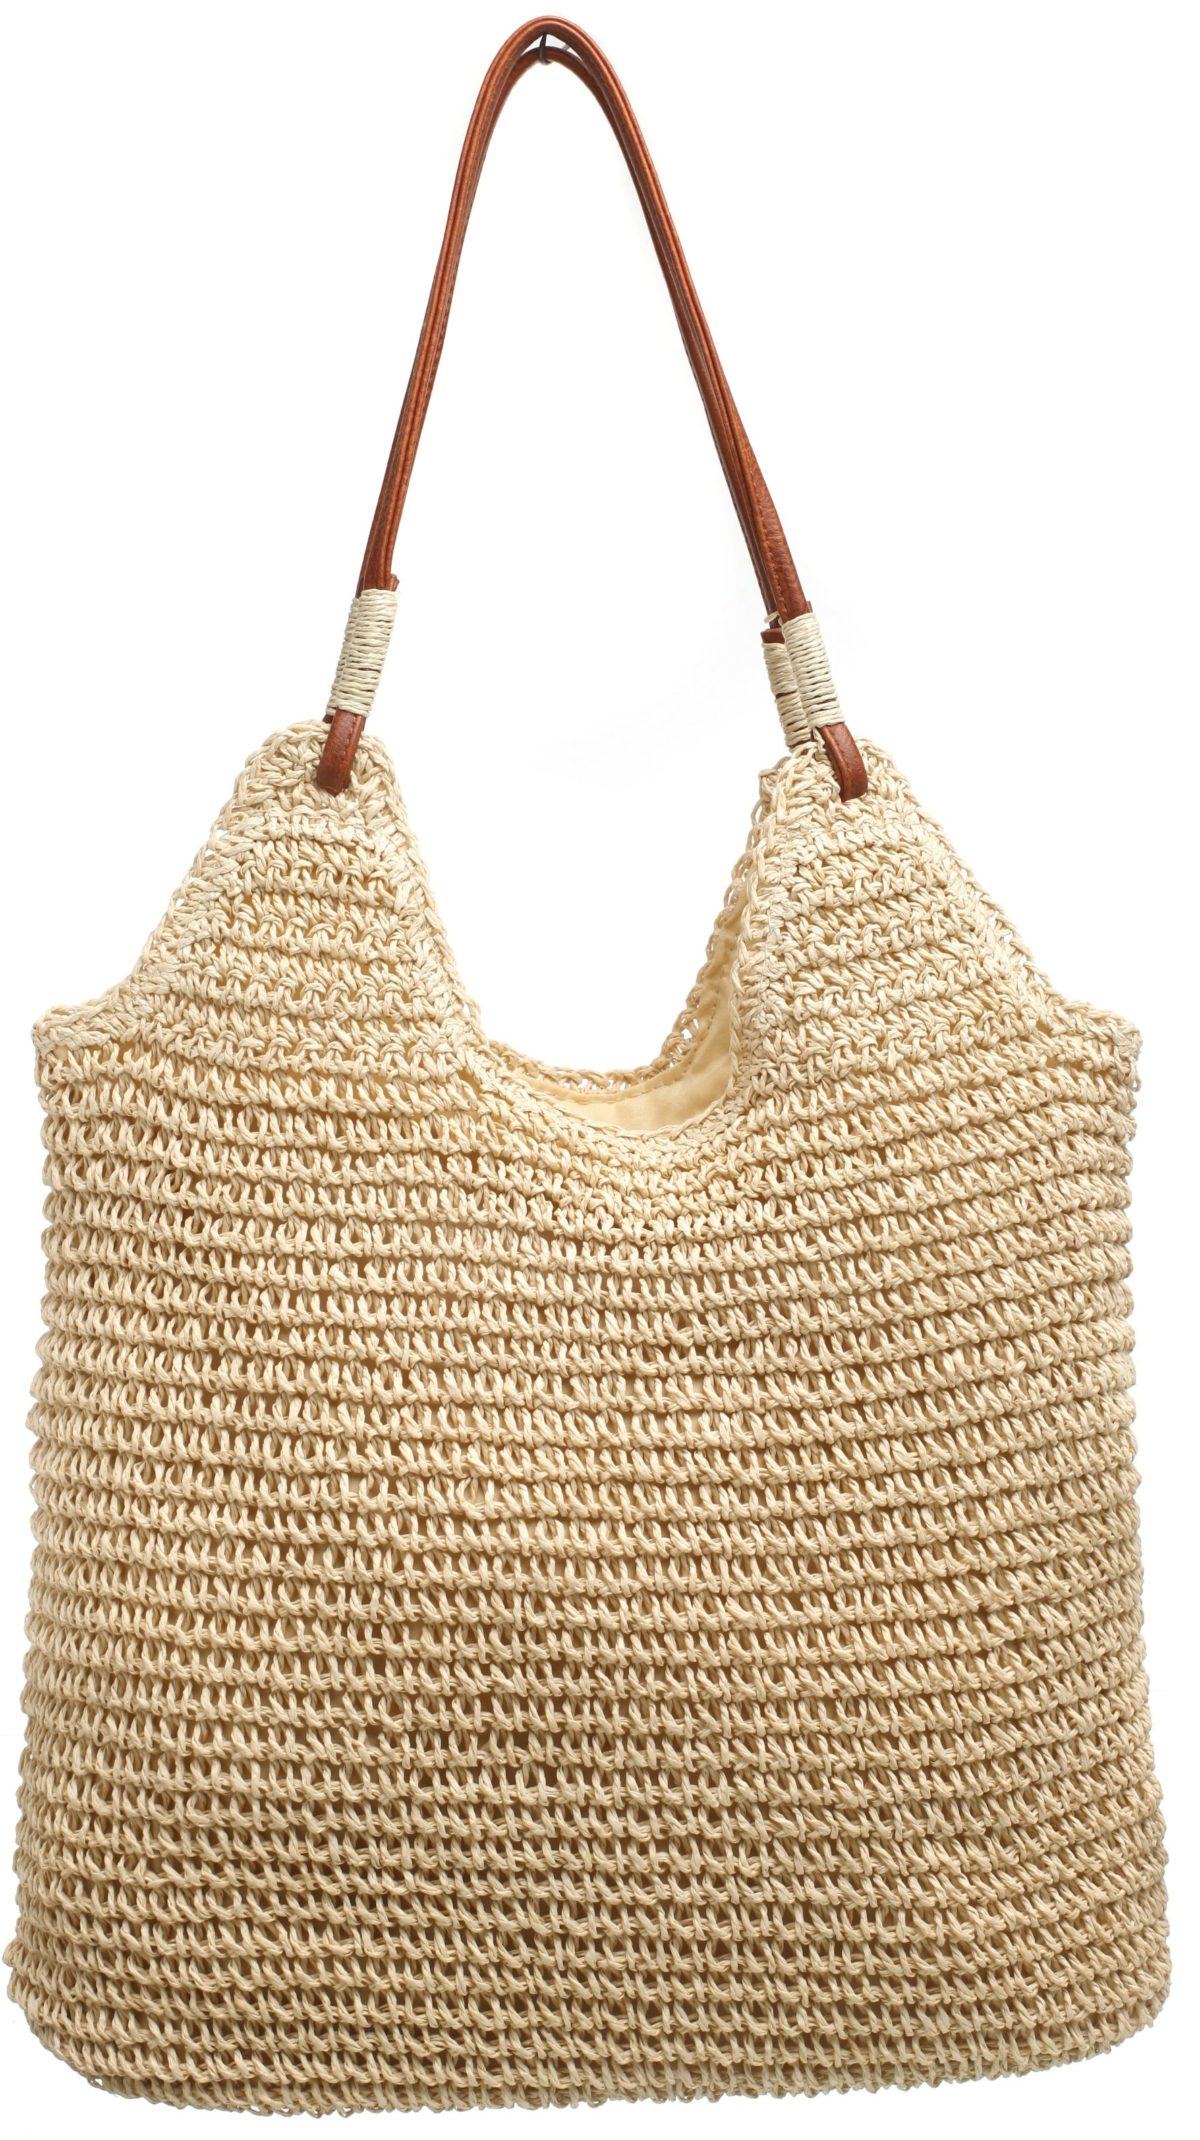 Beige woven bag with brown leather handels and zip